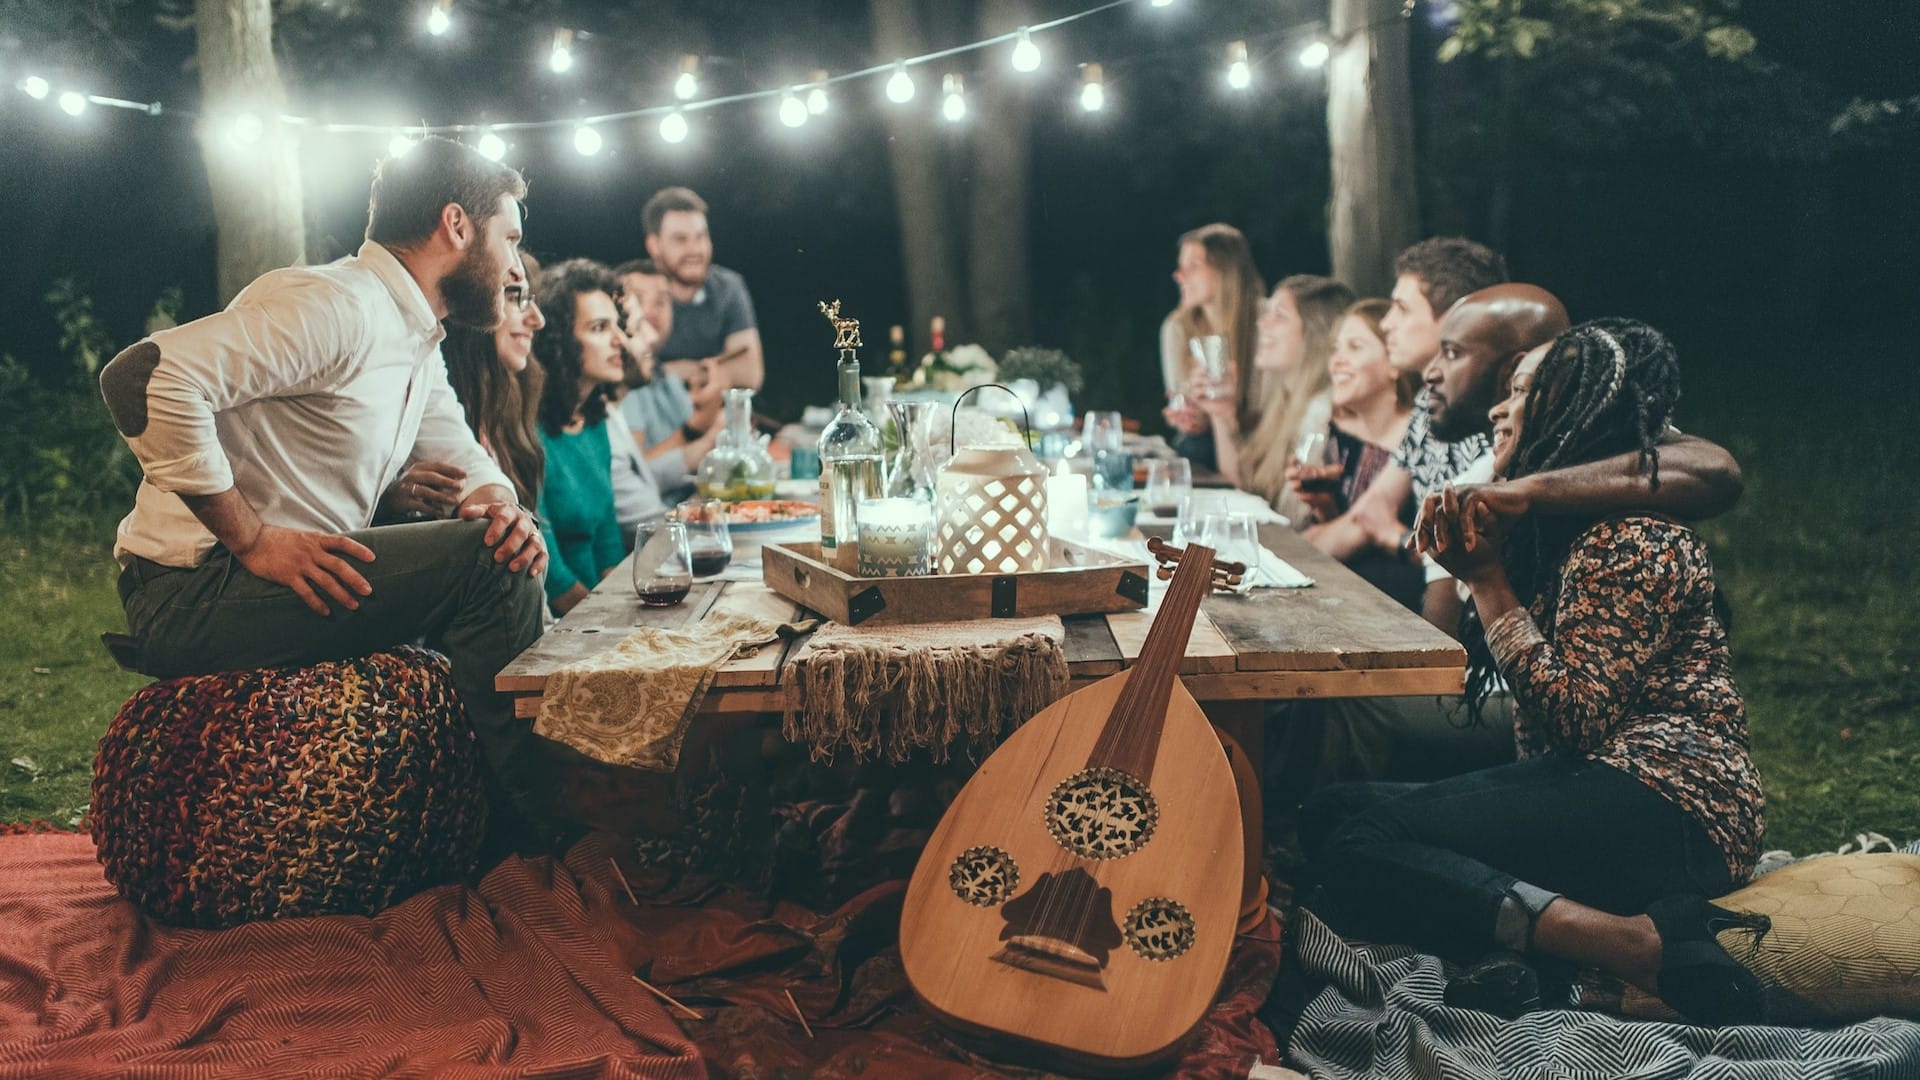 Image: A group of friends chatting over a table, with fairy lights, a guitar, and food. They are clearly reveling in the importance of human connection